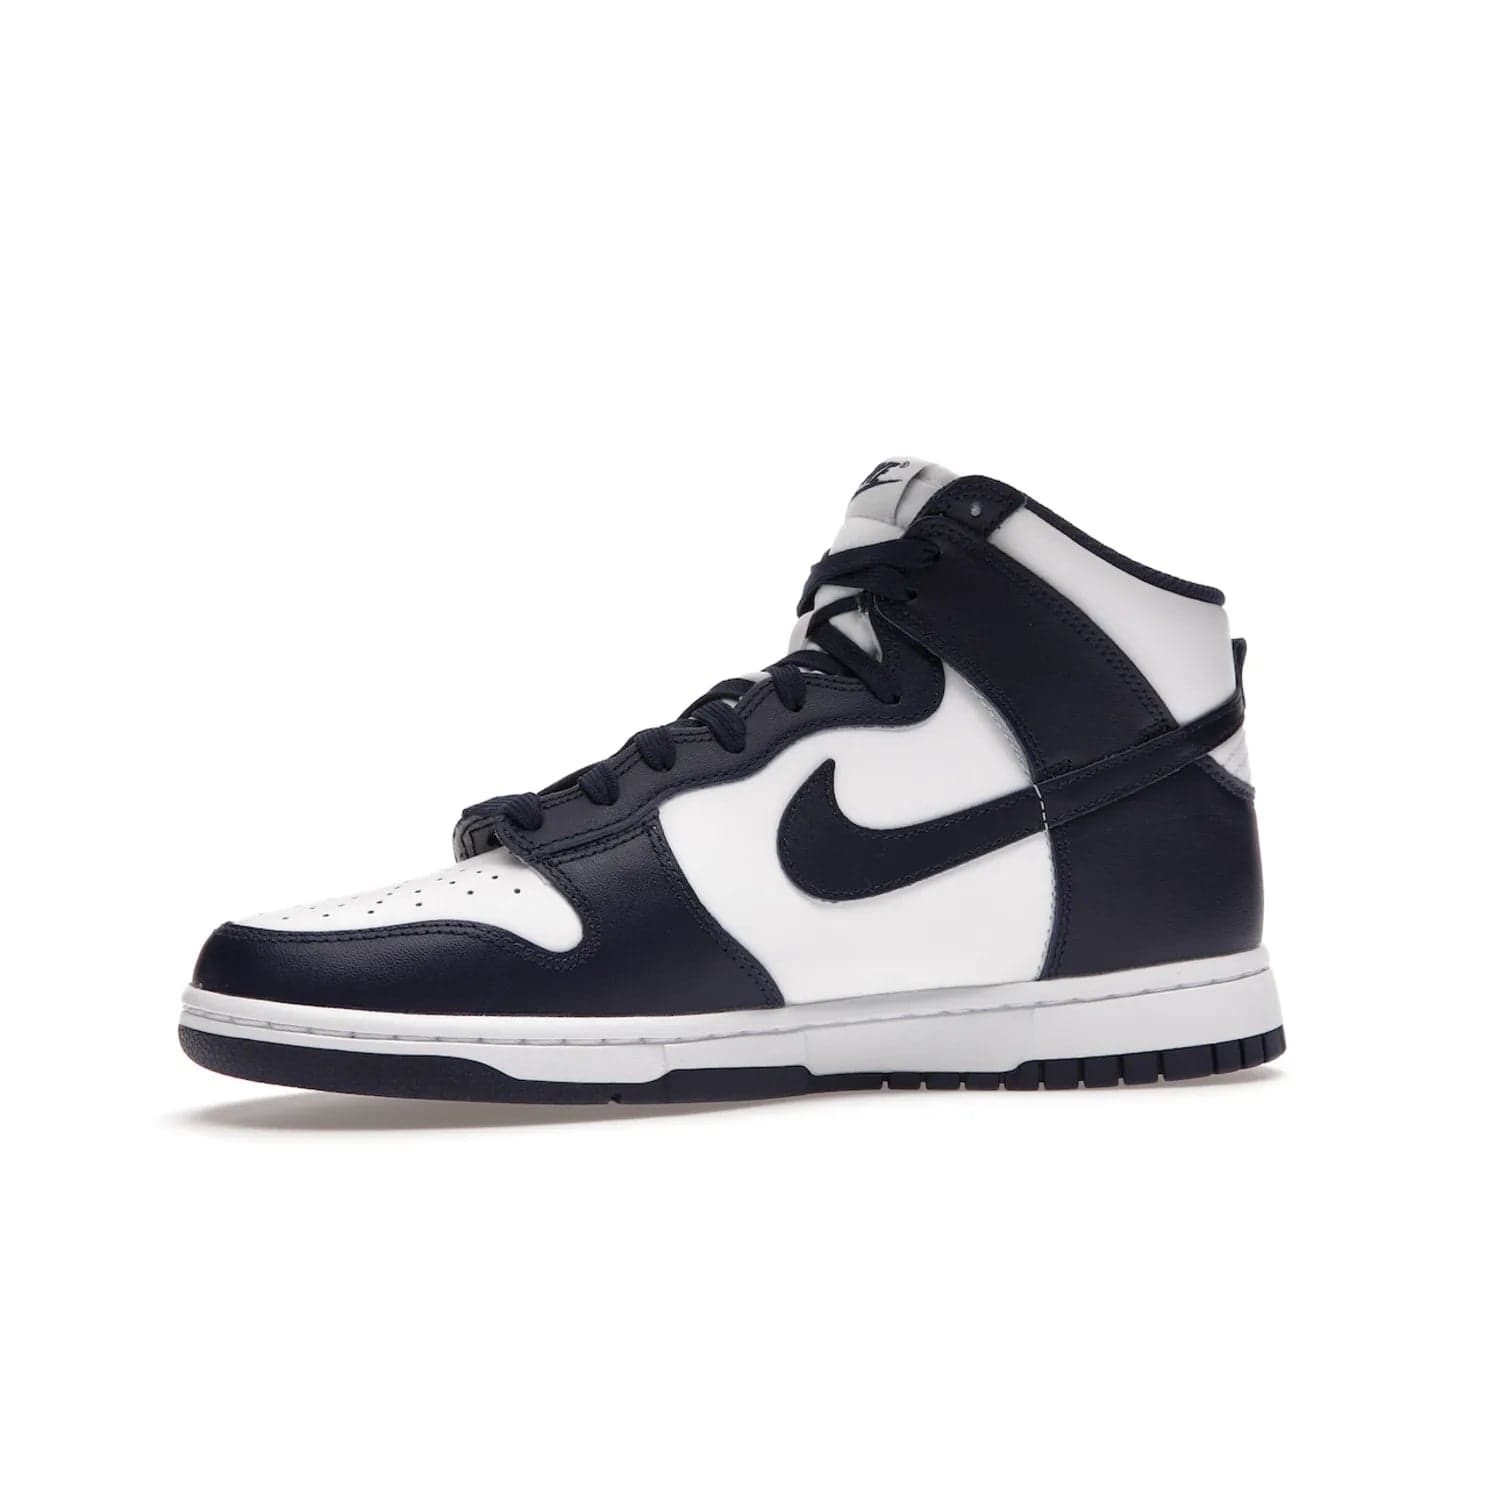 Nike Dunk High Championship Navy - Image 17 - Only at www.BallersClubKickz.com - Classic Nike Dunk High sneaker delivers an unforgettable style with white leather upper, Championship Navy overlays, and matching woven tongue label and sole. Make a statement with the Championship Navy today.